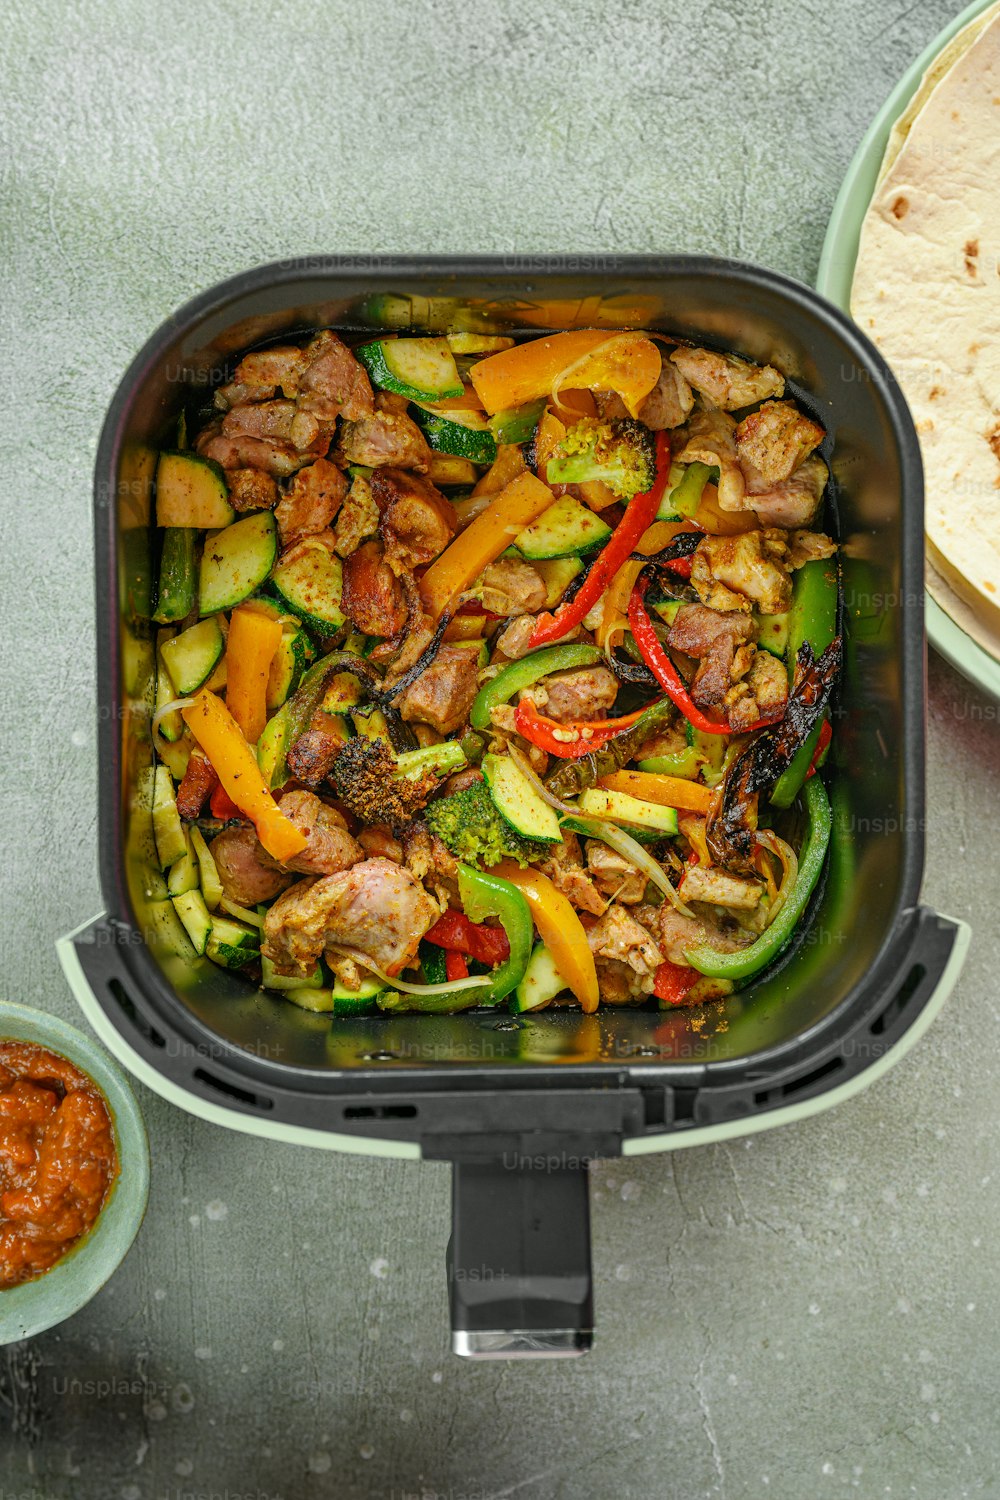 a pan filled with meat and veggies next to a plate of tortill